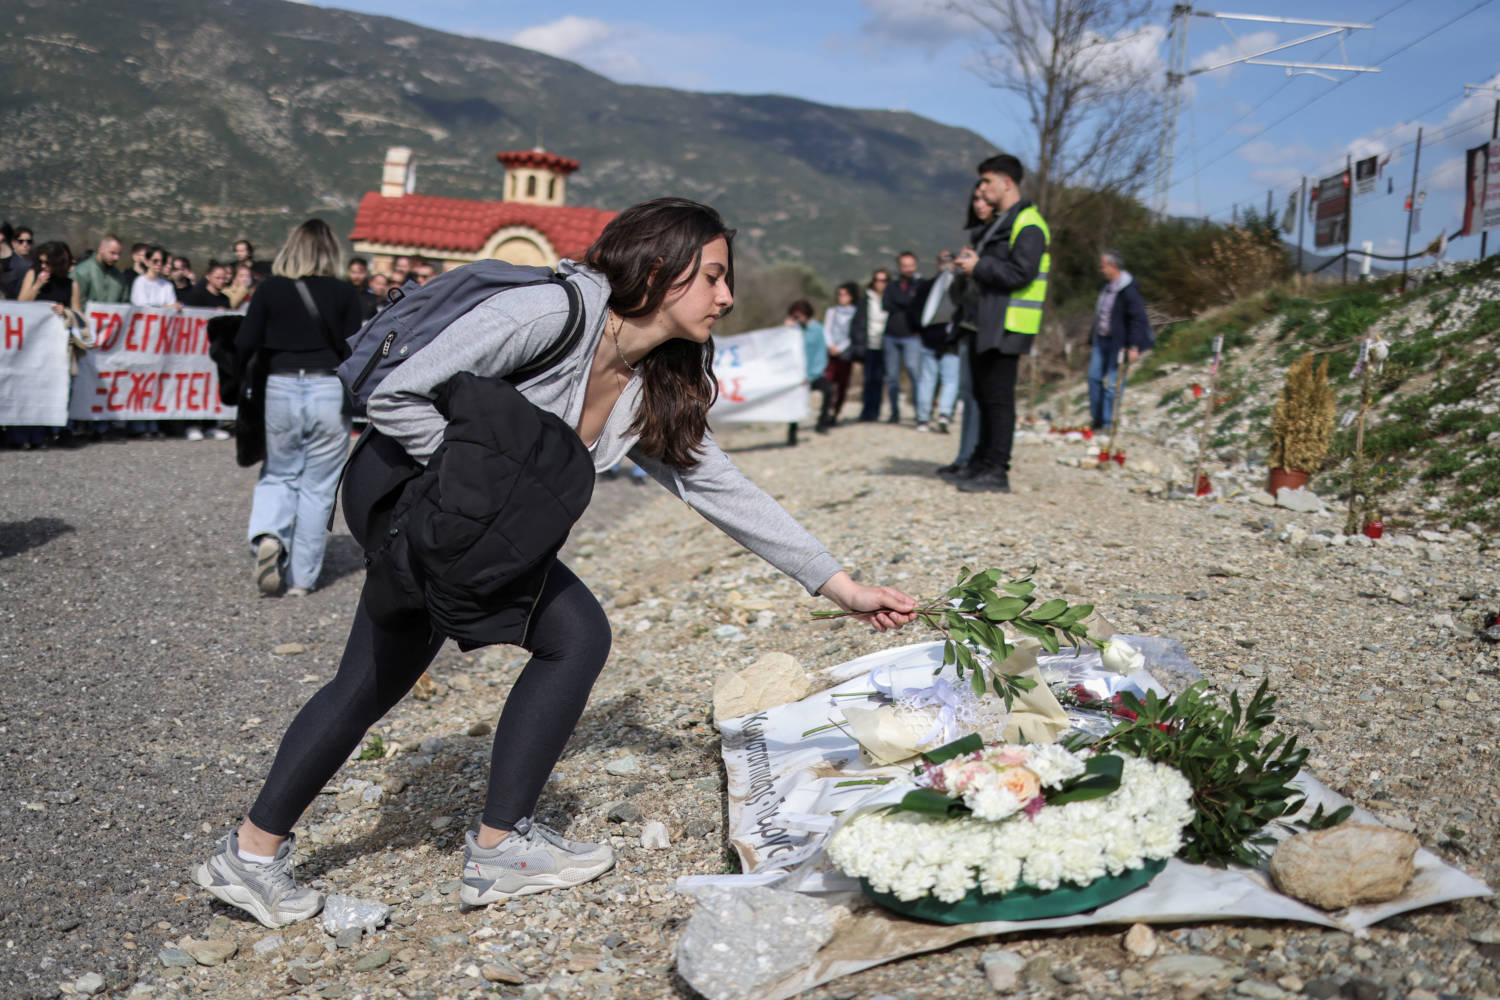 University Students From Across The Country, Demonstrate At The Site Of Greece's Deadliest Train Crash, In Tempi